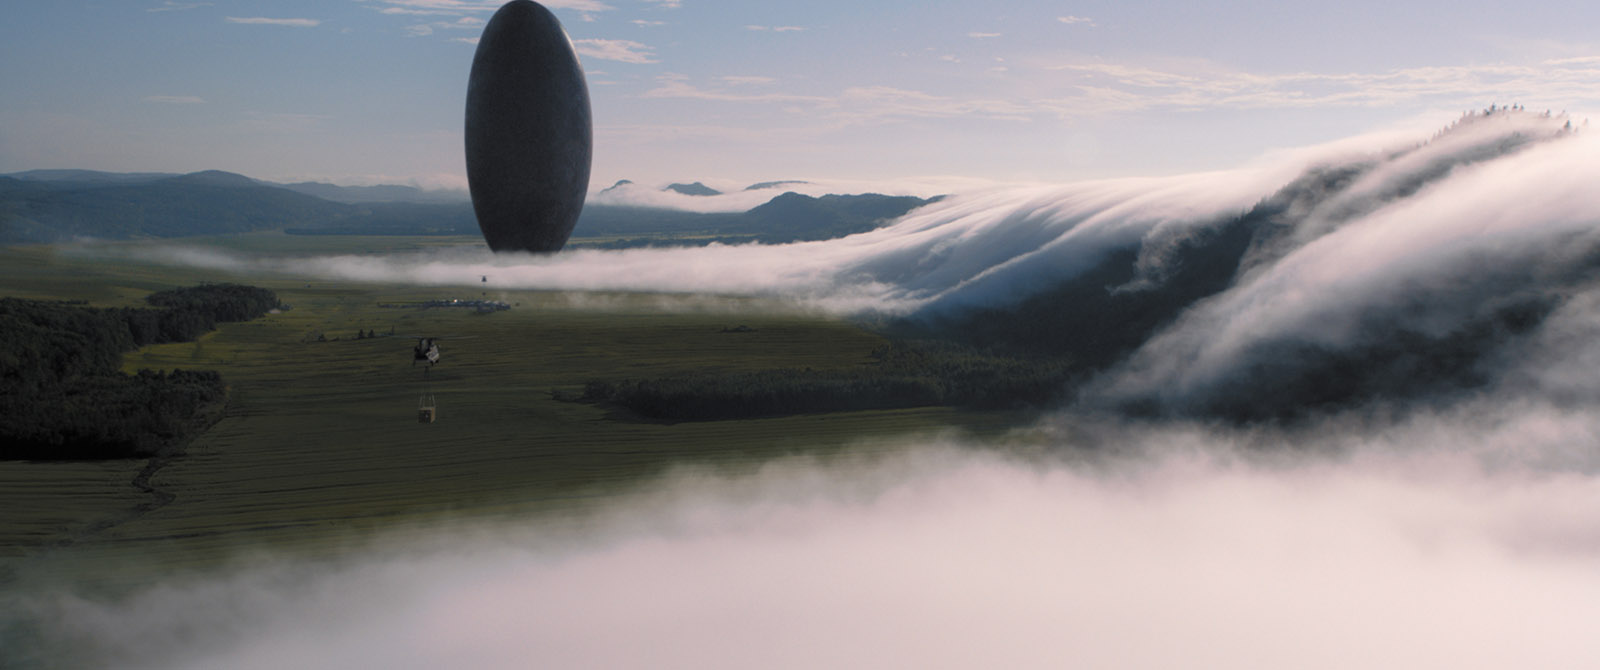 A giant alien spaceship that has landed in Montana in Arrival, Denis Villeneuve’s film adaptation of a story by Ted Chiang